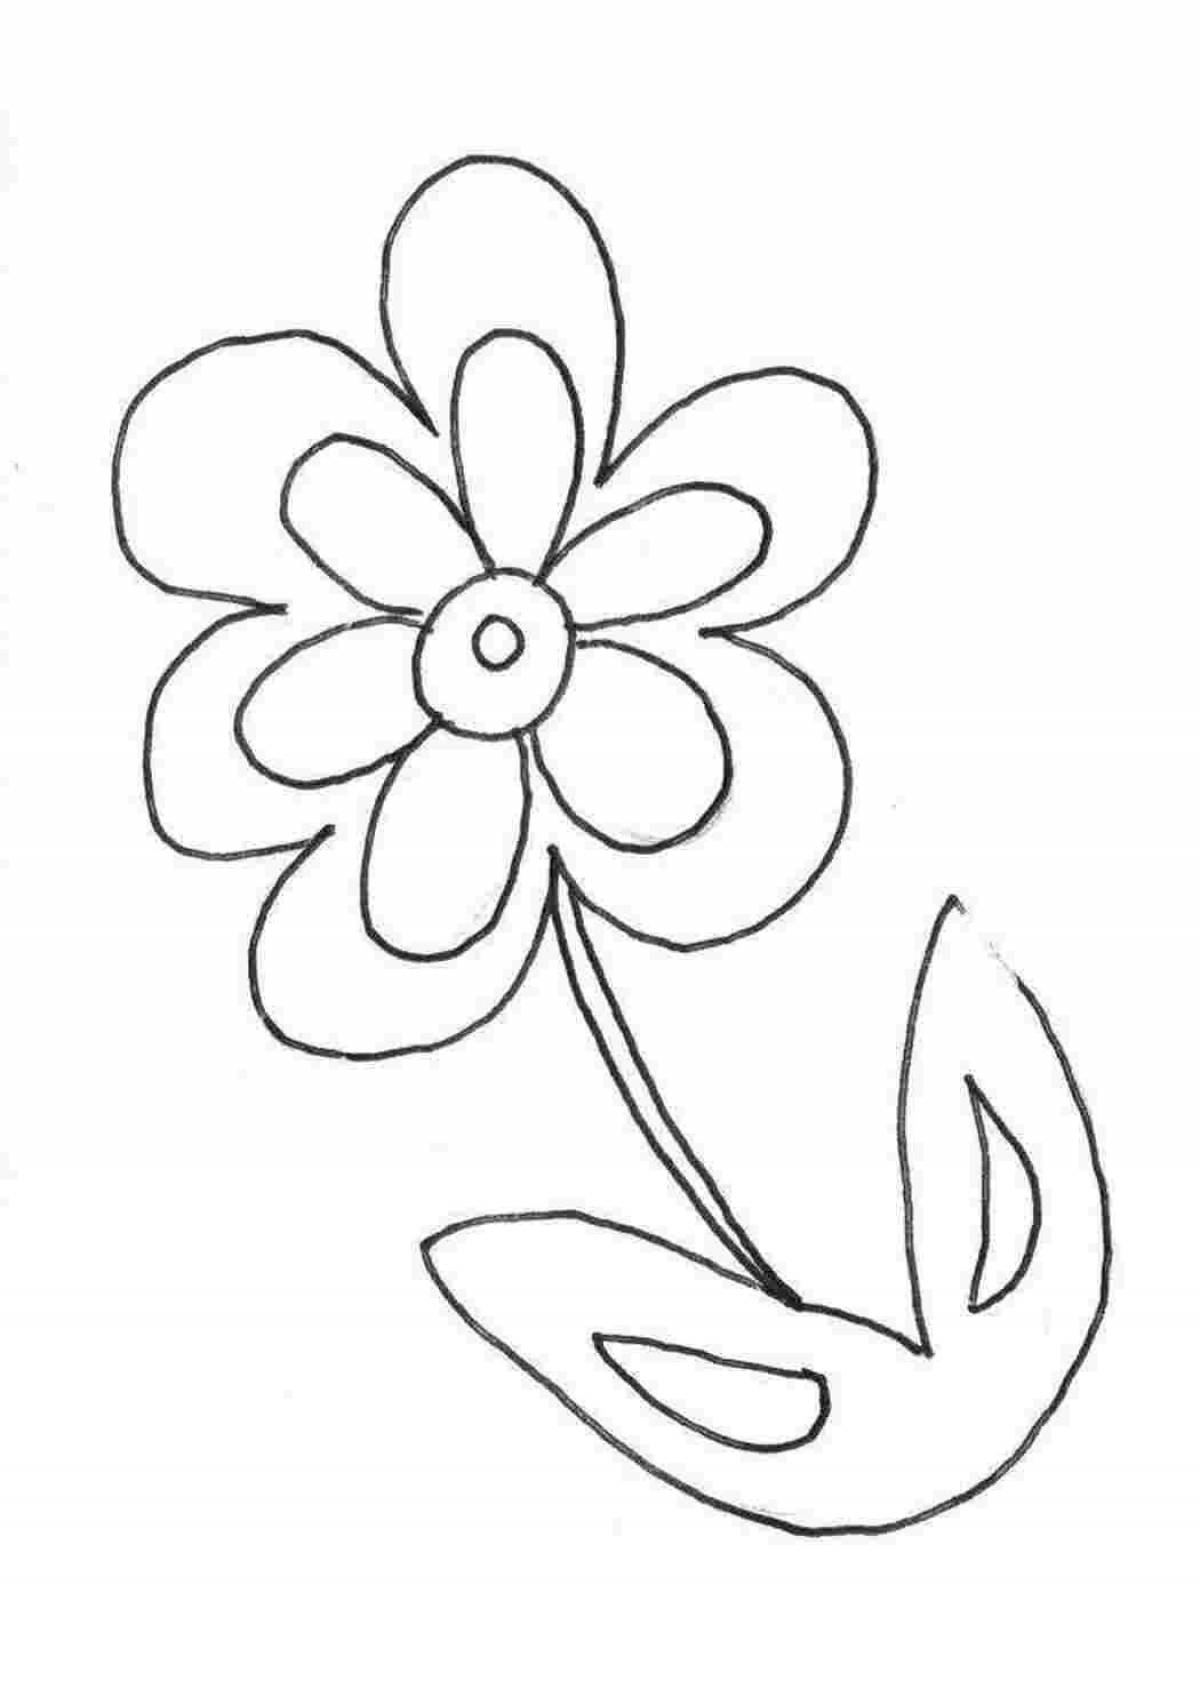 Playful simple flower coloring